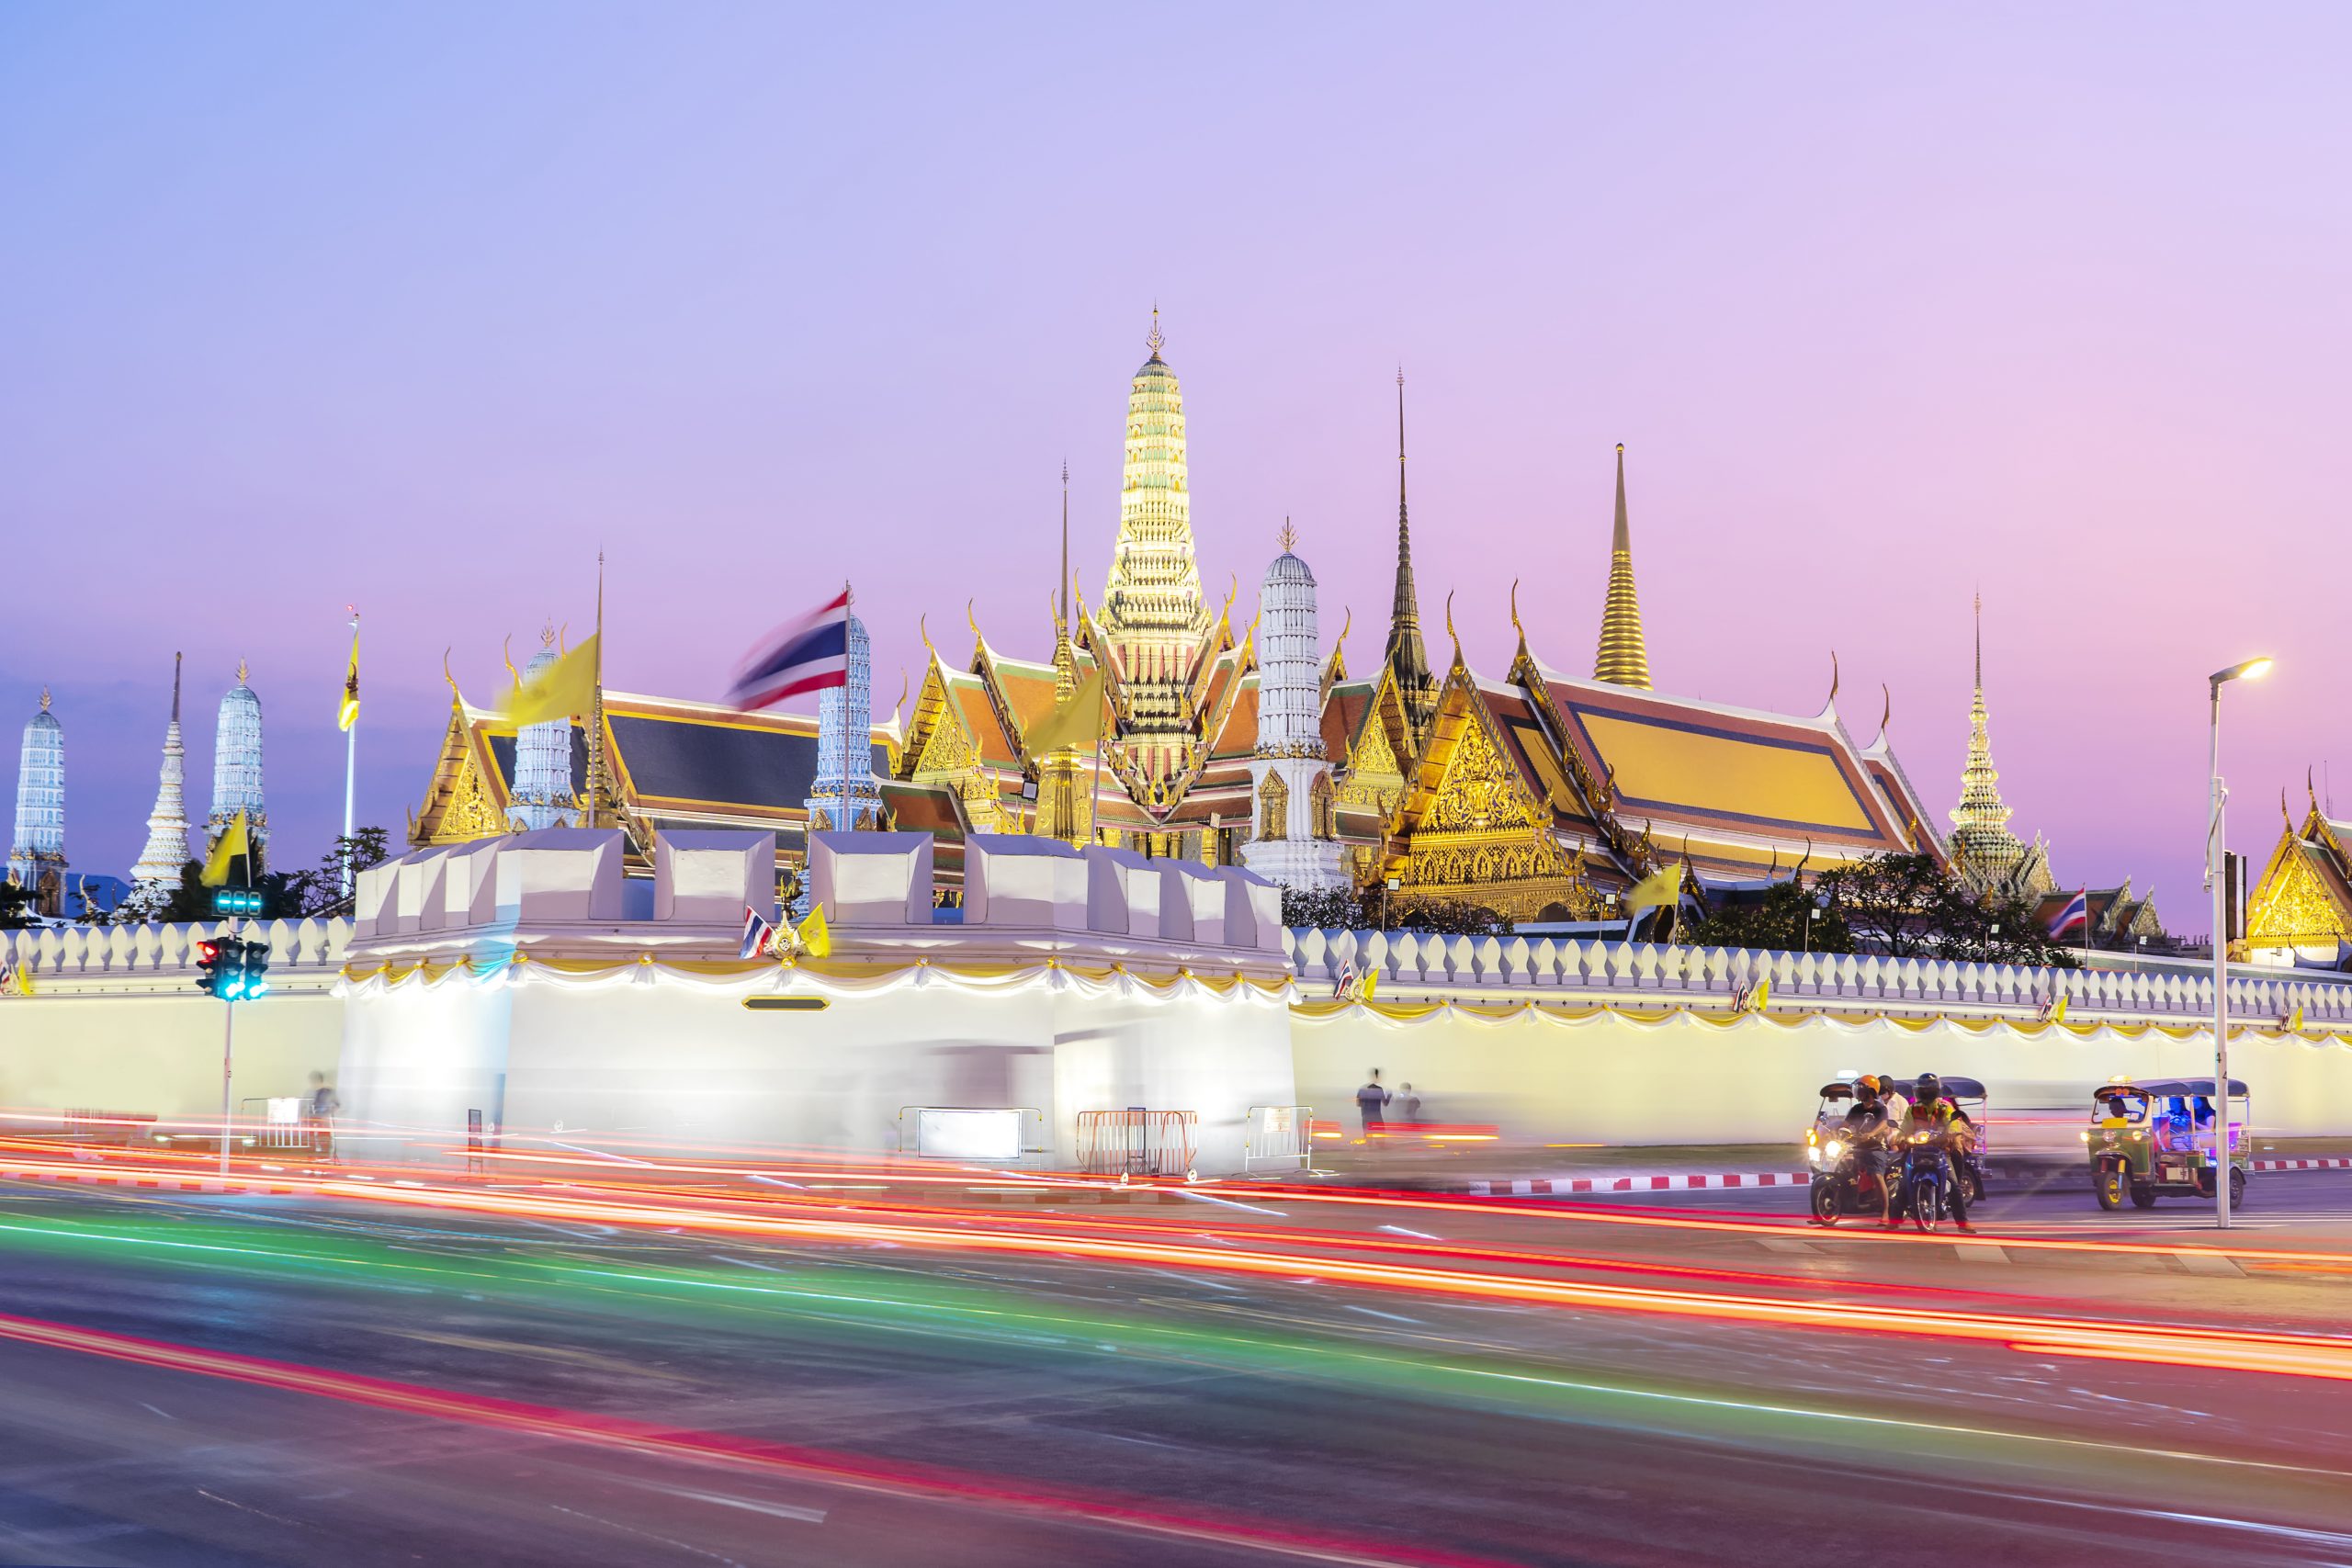 Grand palace and Wat phra keaw at sunset bangkok, Thailand. The traffic beam is a beautiful color for the foreground.